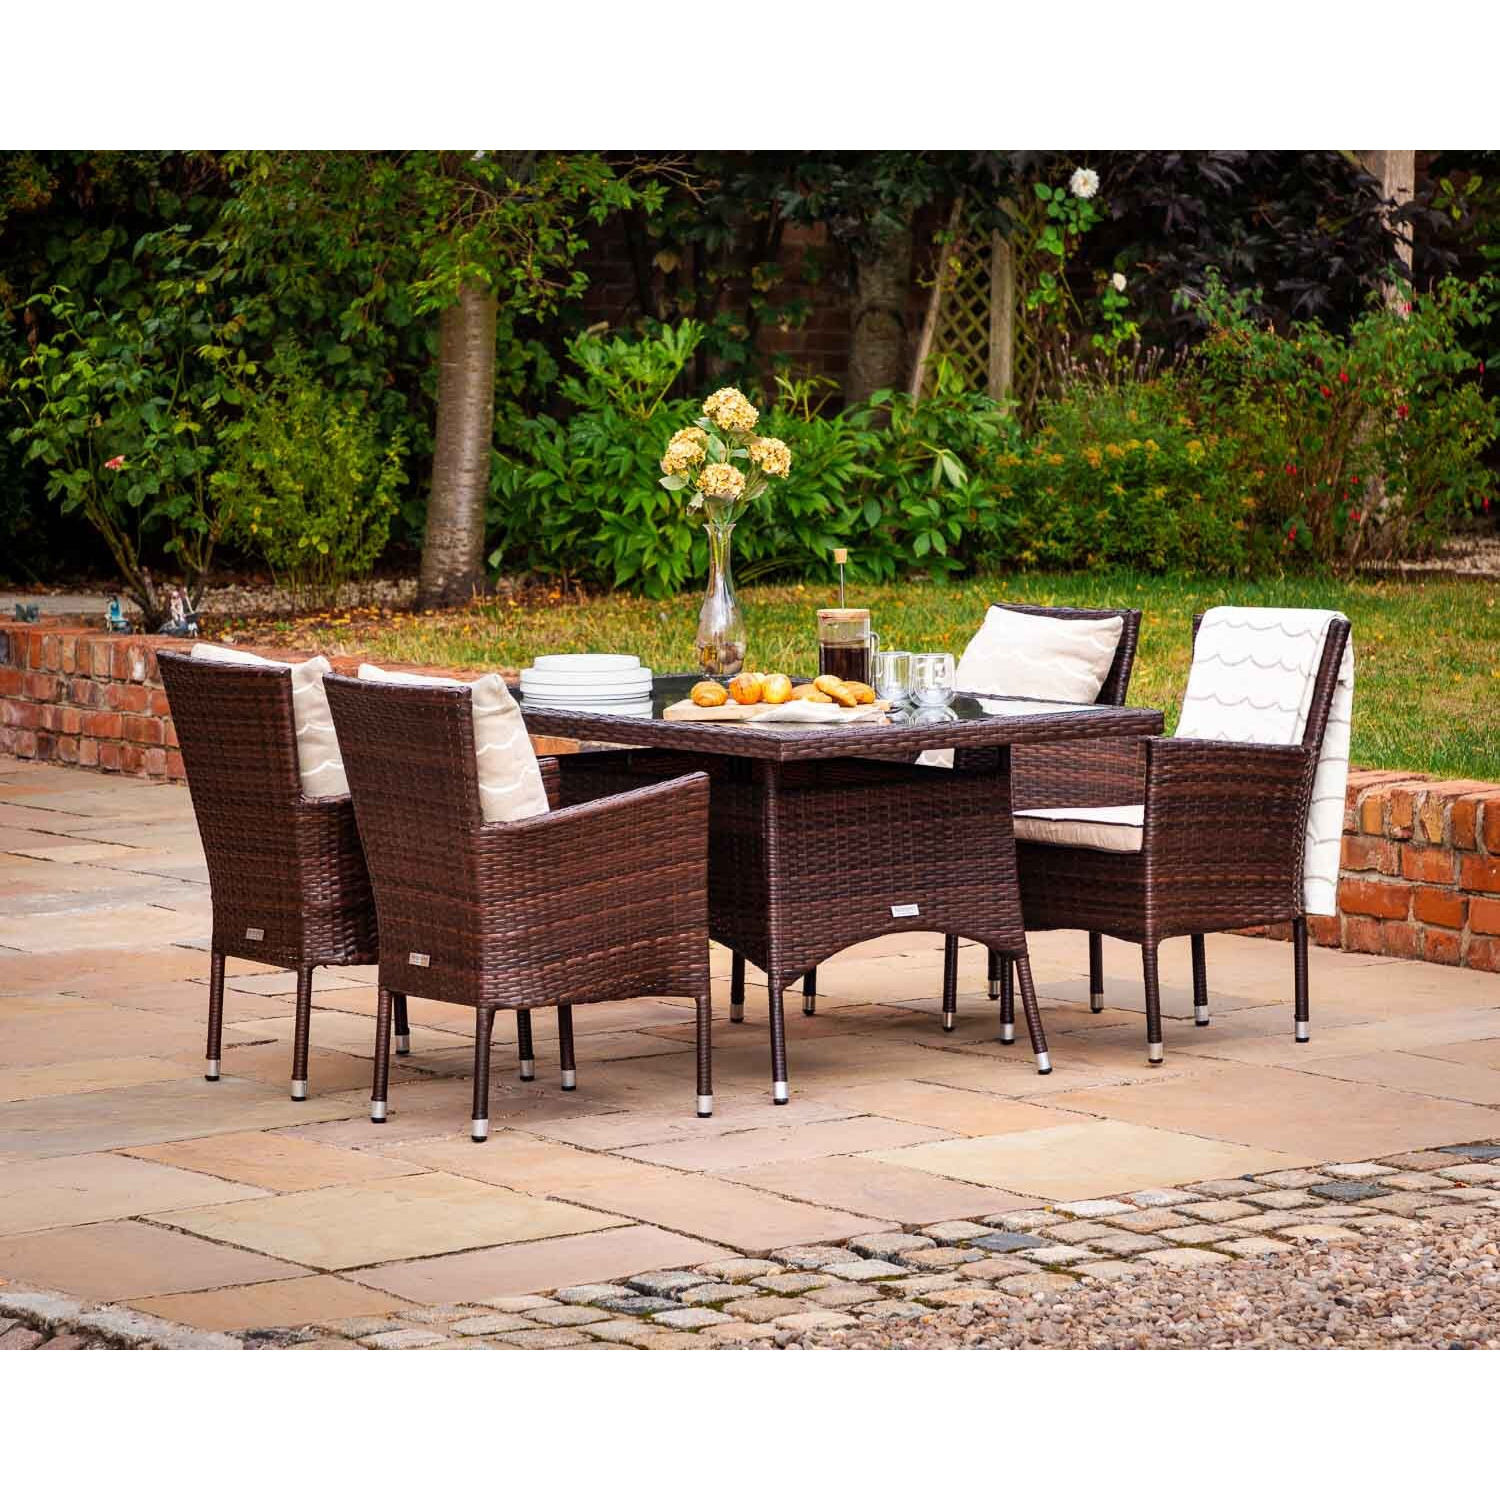 4 Rattan Garden Chairs & Small Rectangular Dining Table Set in Brown - Cambridge - Rattan Direct